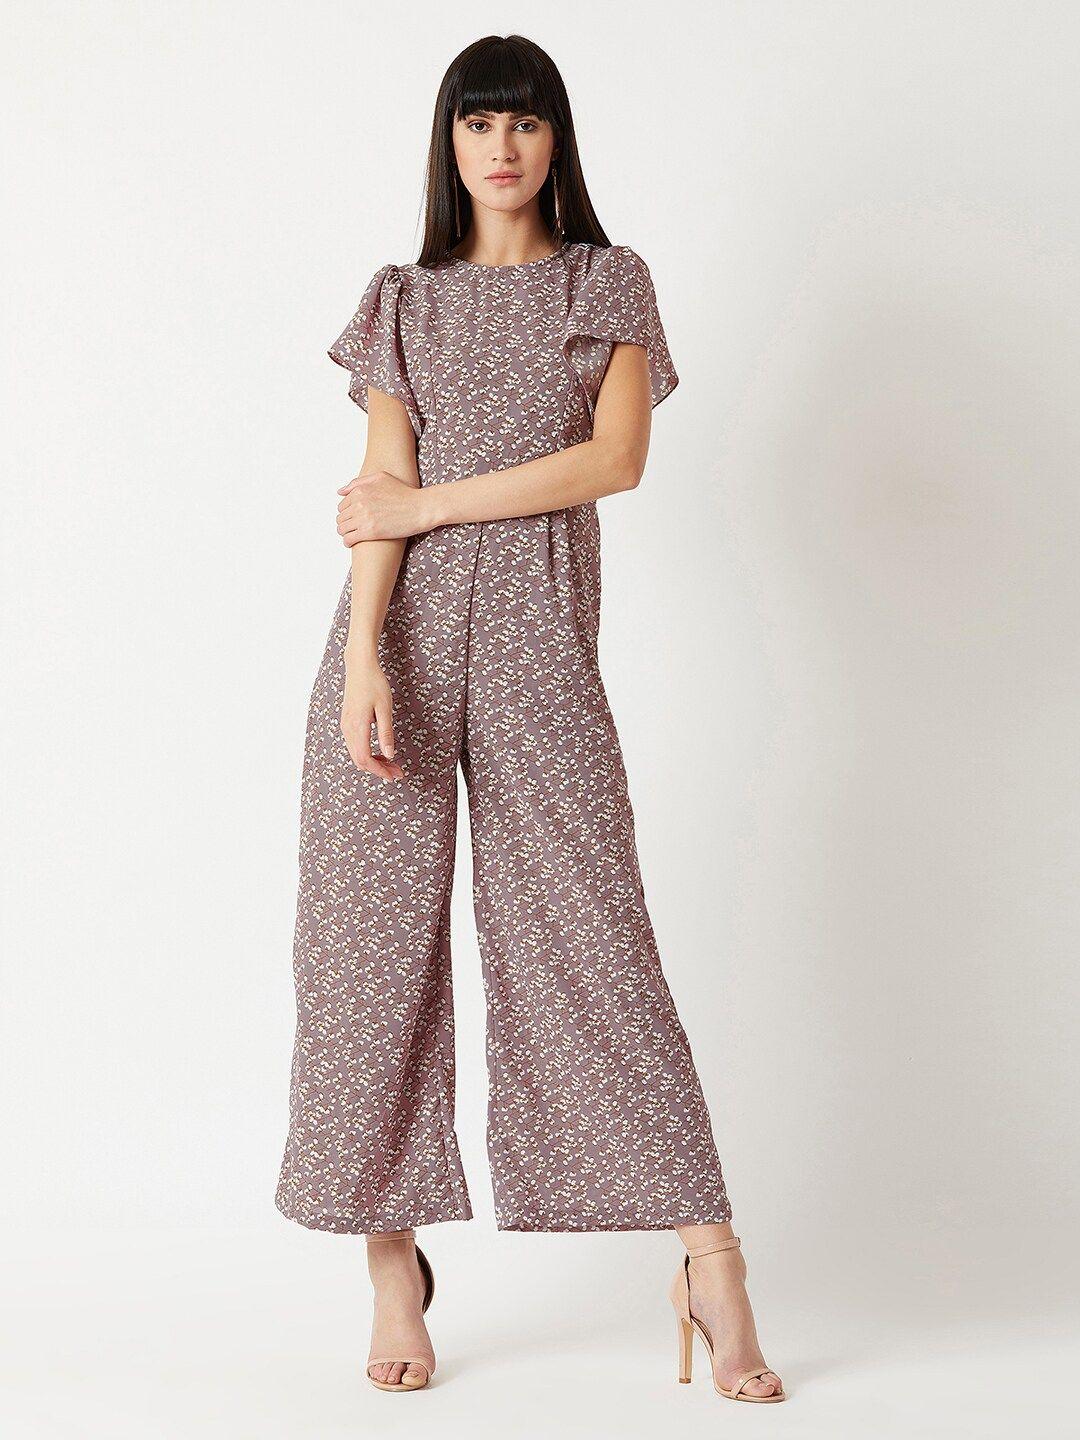 miss-chase-grey-&-white-printed-basic-jumpsuit